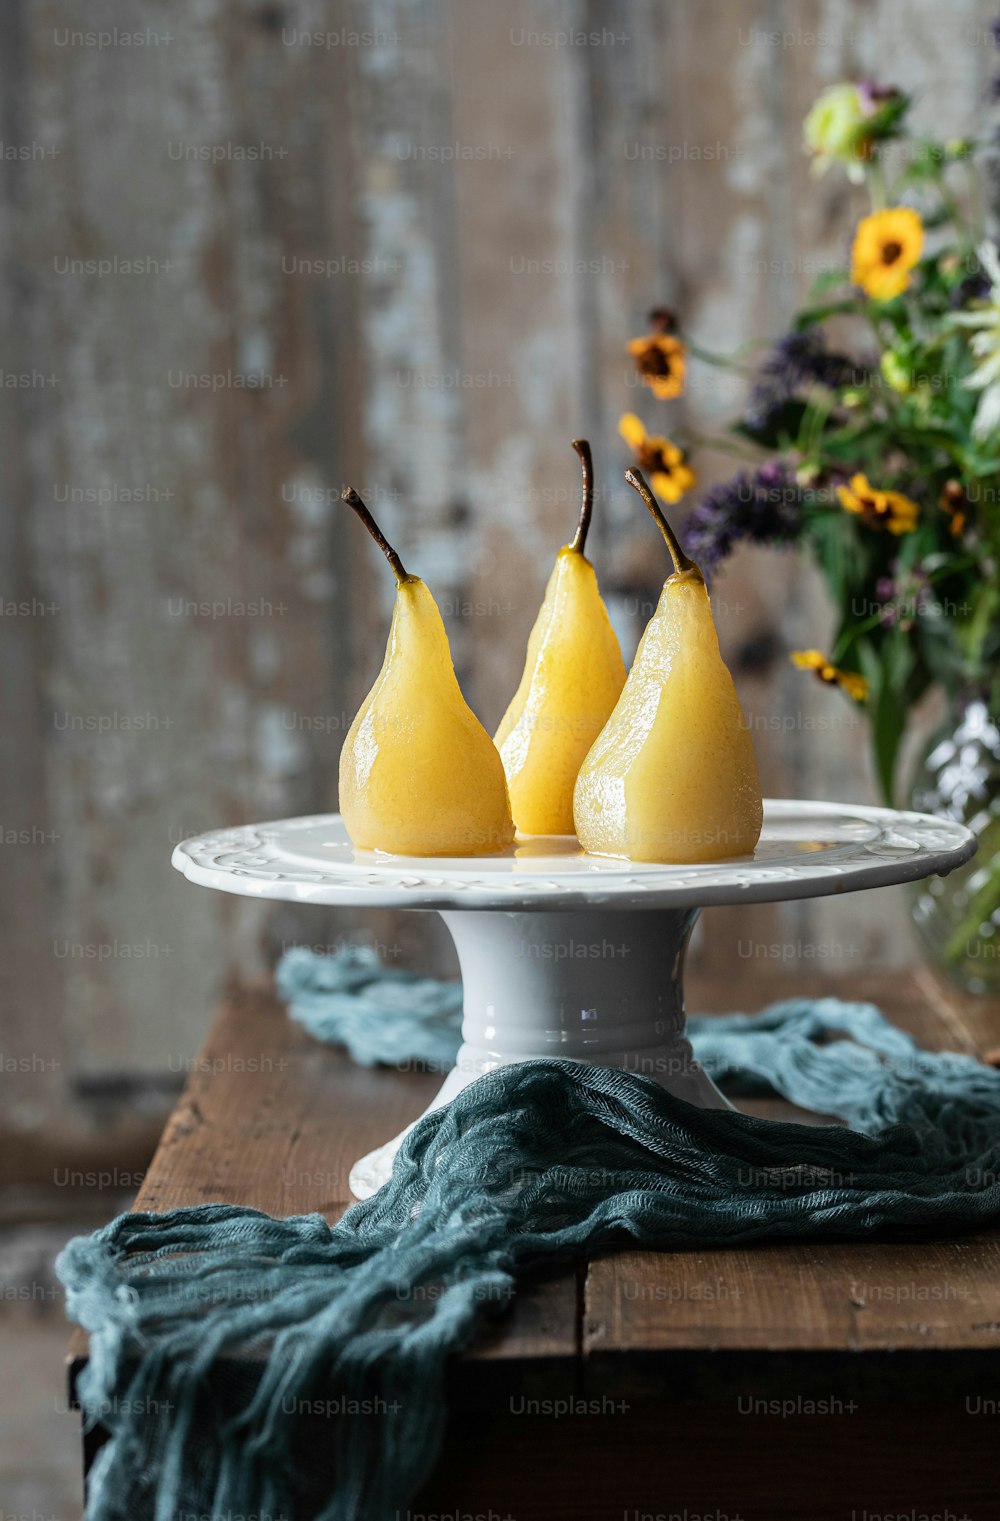 three pears on a white plate with flowers in the background